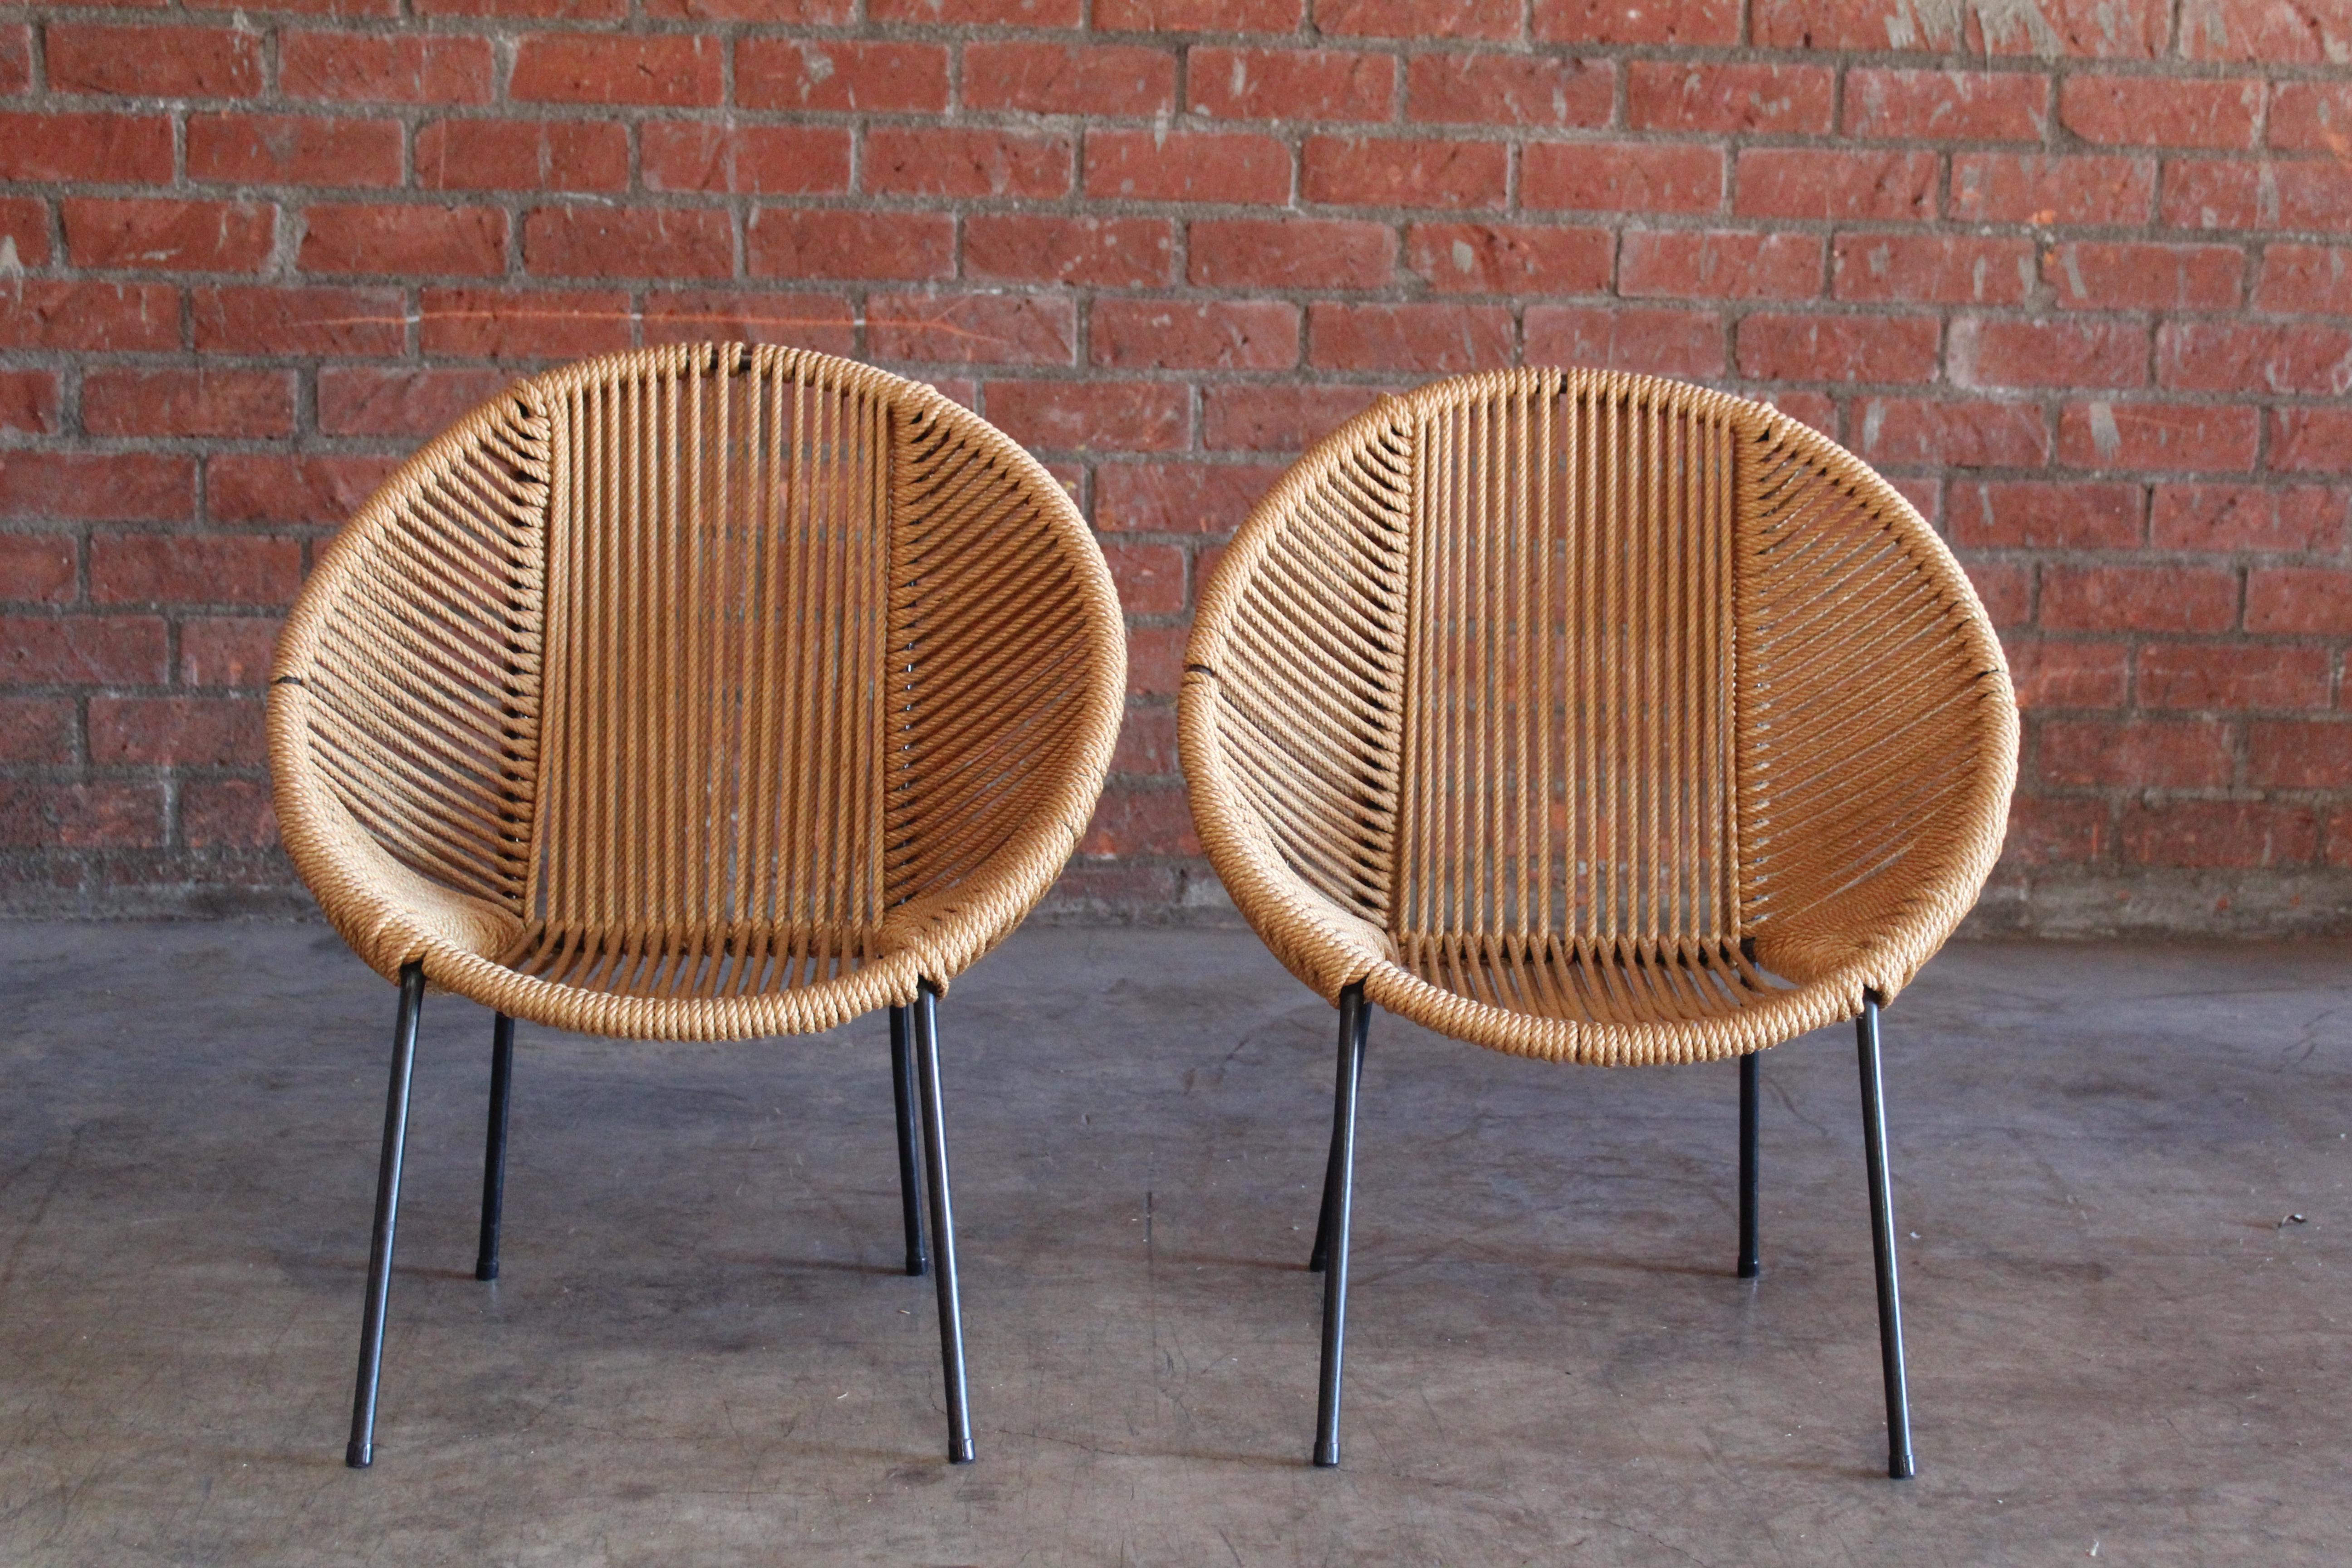 French Pair of 1950s Children's Iron and Rope Chairs, France